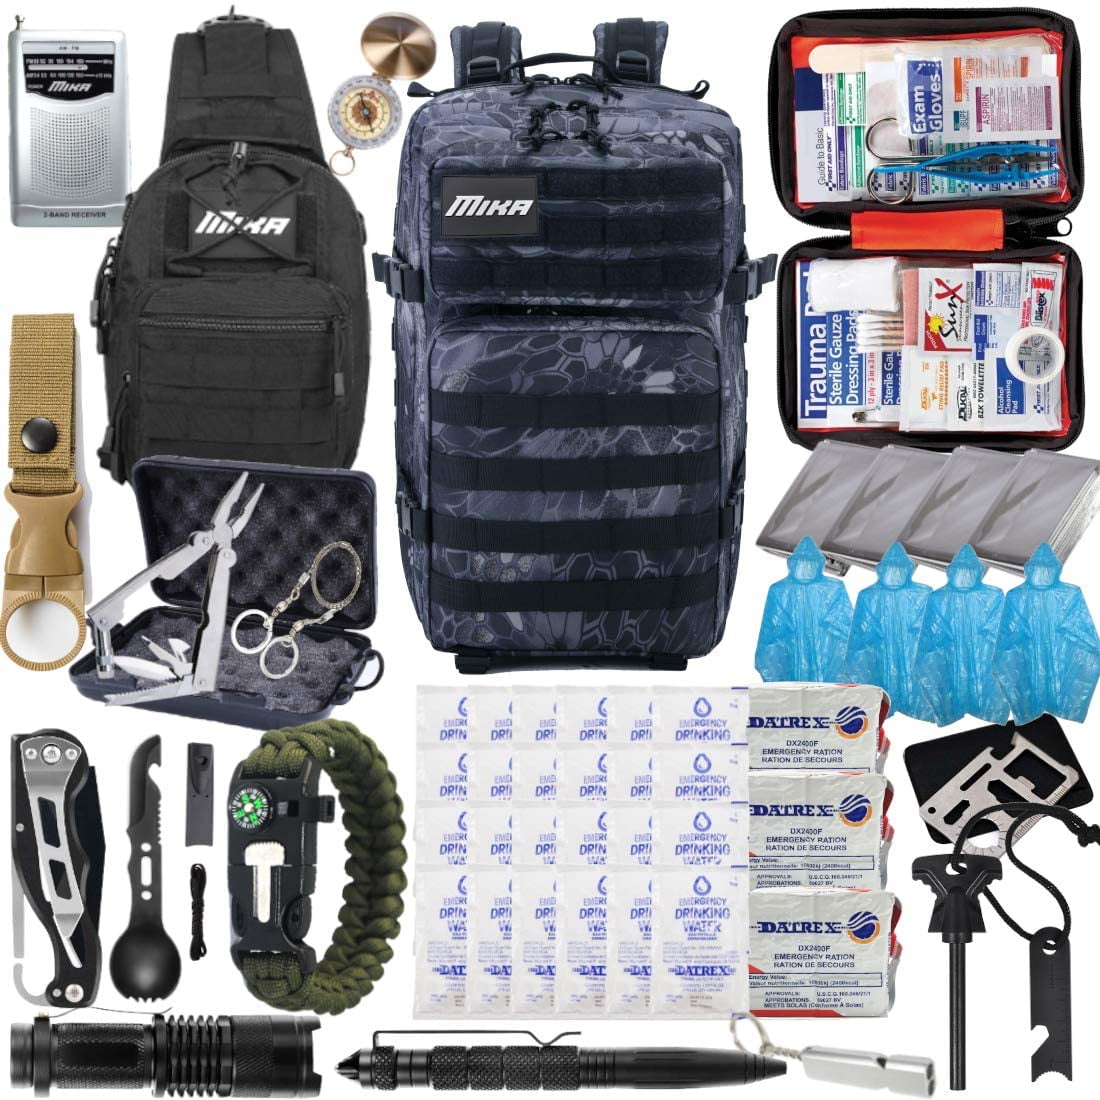 EVERLIT Complete 72 Hours Earthquake Bug Out Bag Emergency Survival Kit for Family Other Disasters Floods Be Prepared for Hurricanes Tsunami 